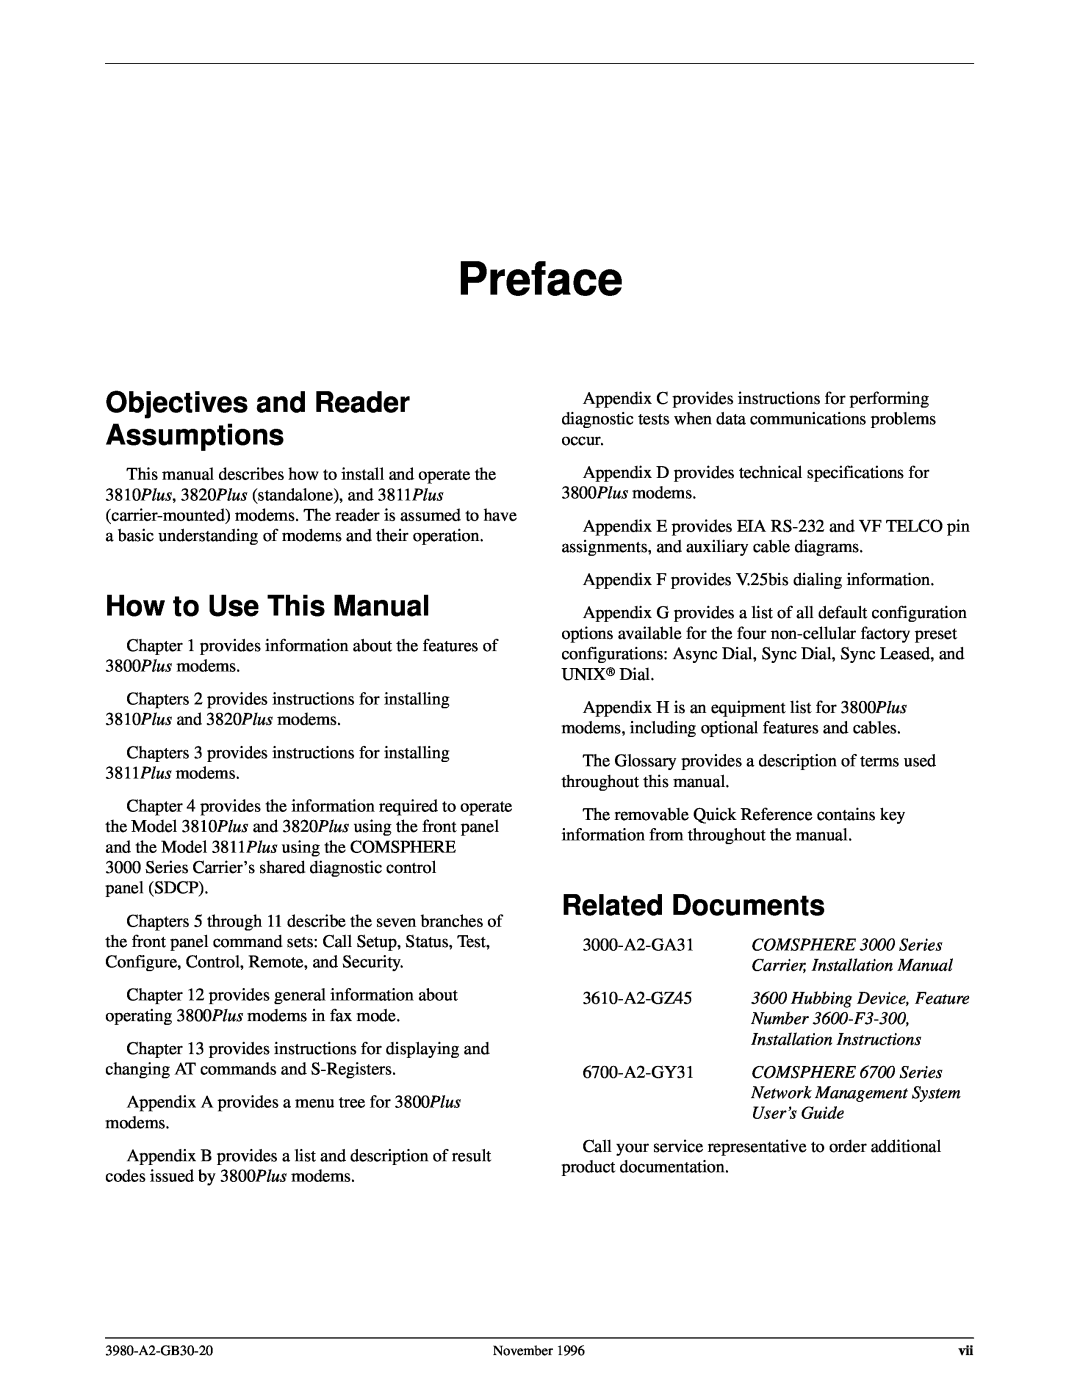 Paradyne 3800PLUS manual Preface, Objectives and Reader Assumptions, How to Use This Manual, Related Documents 